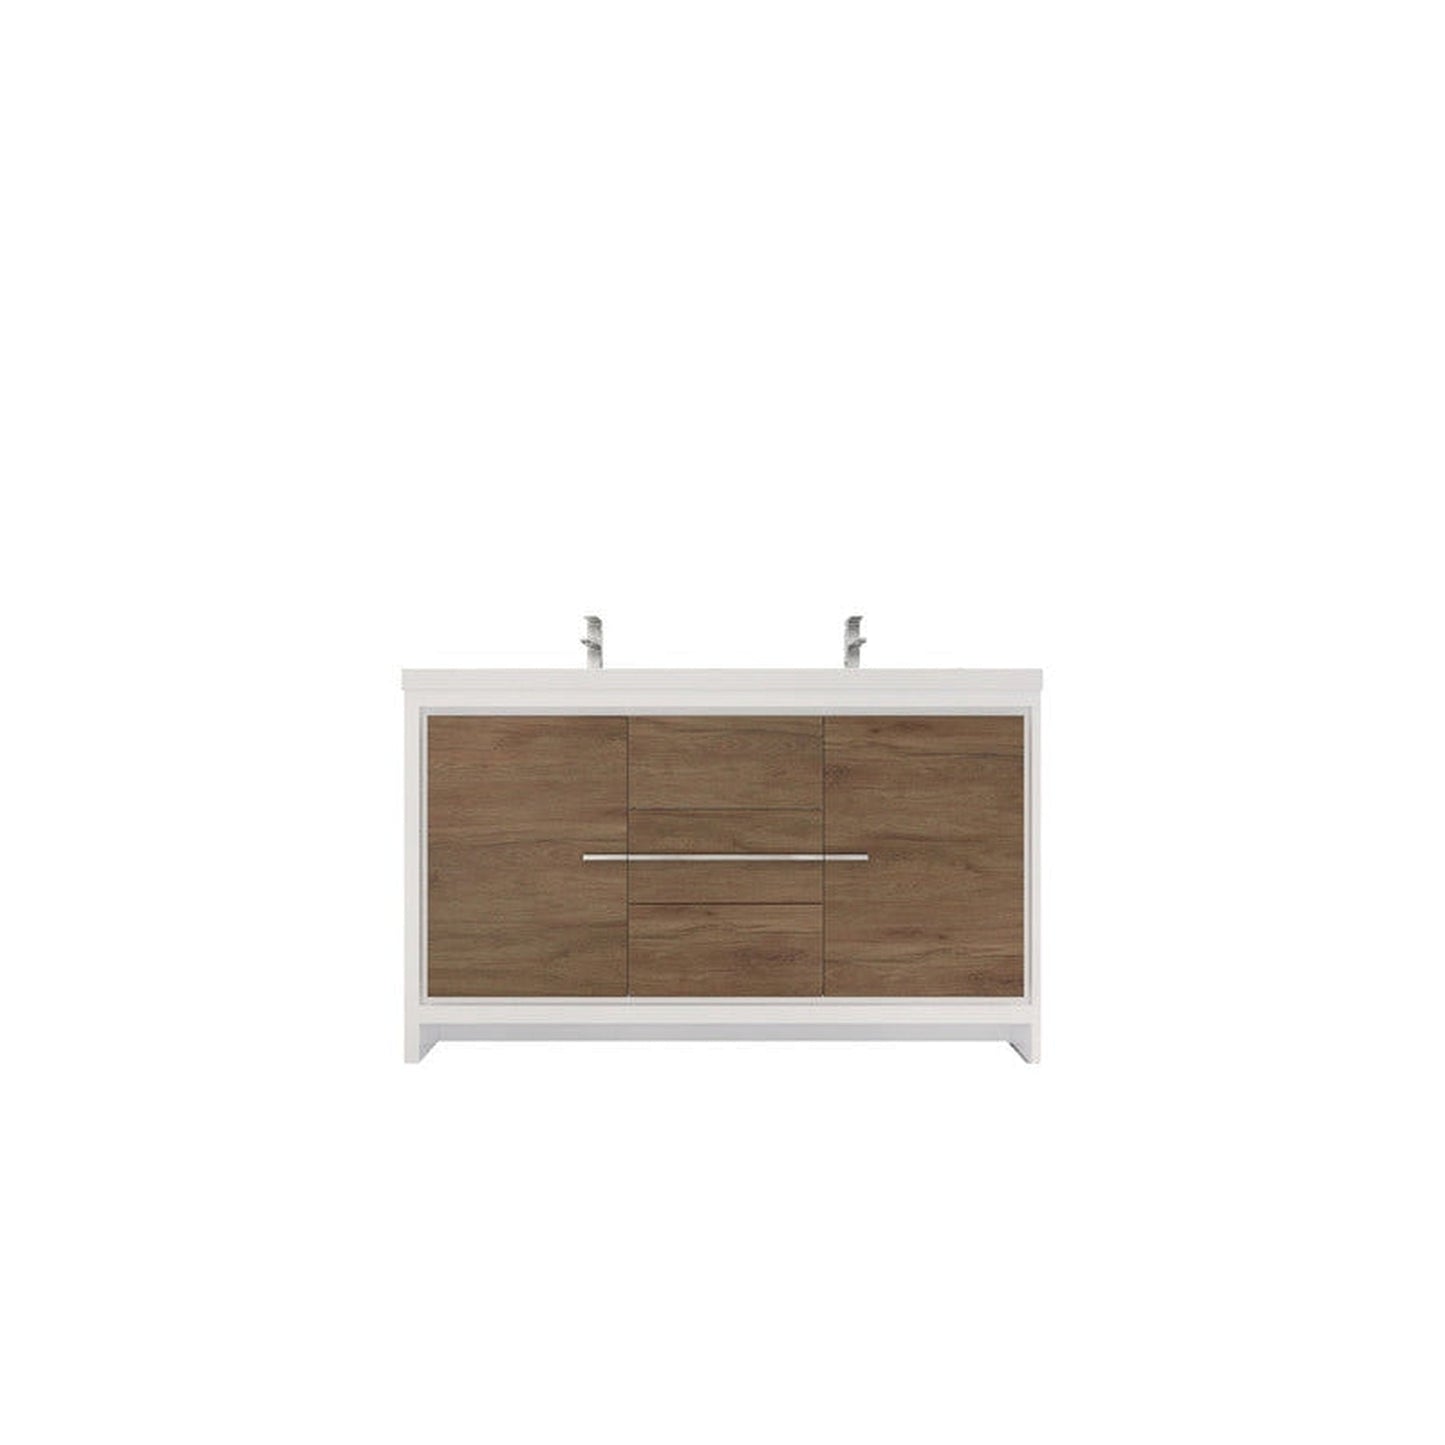 Moreno Bath Dolce 60" White Oak Freestanding Vanity With Double Reinforced White Acrylic Sinks